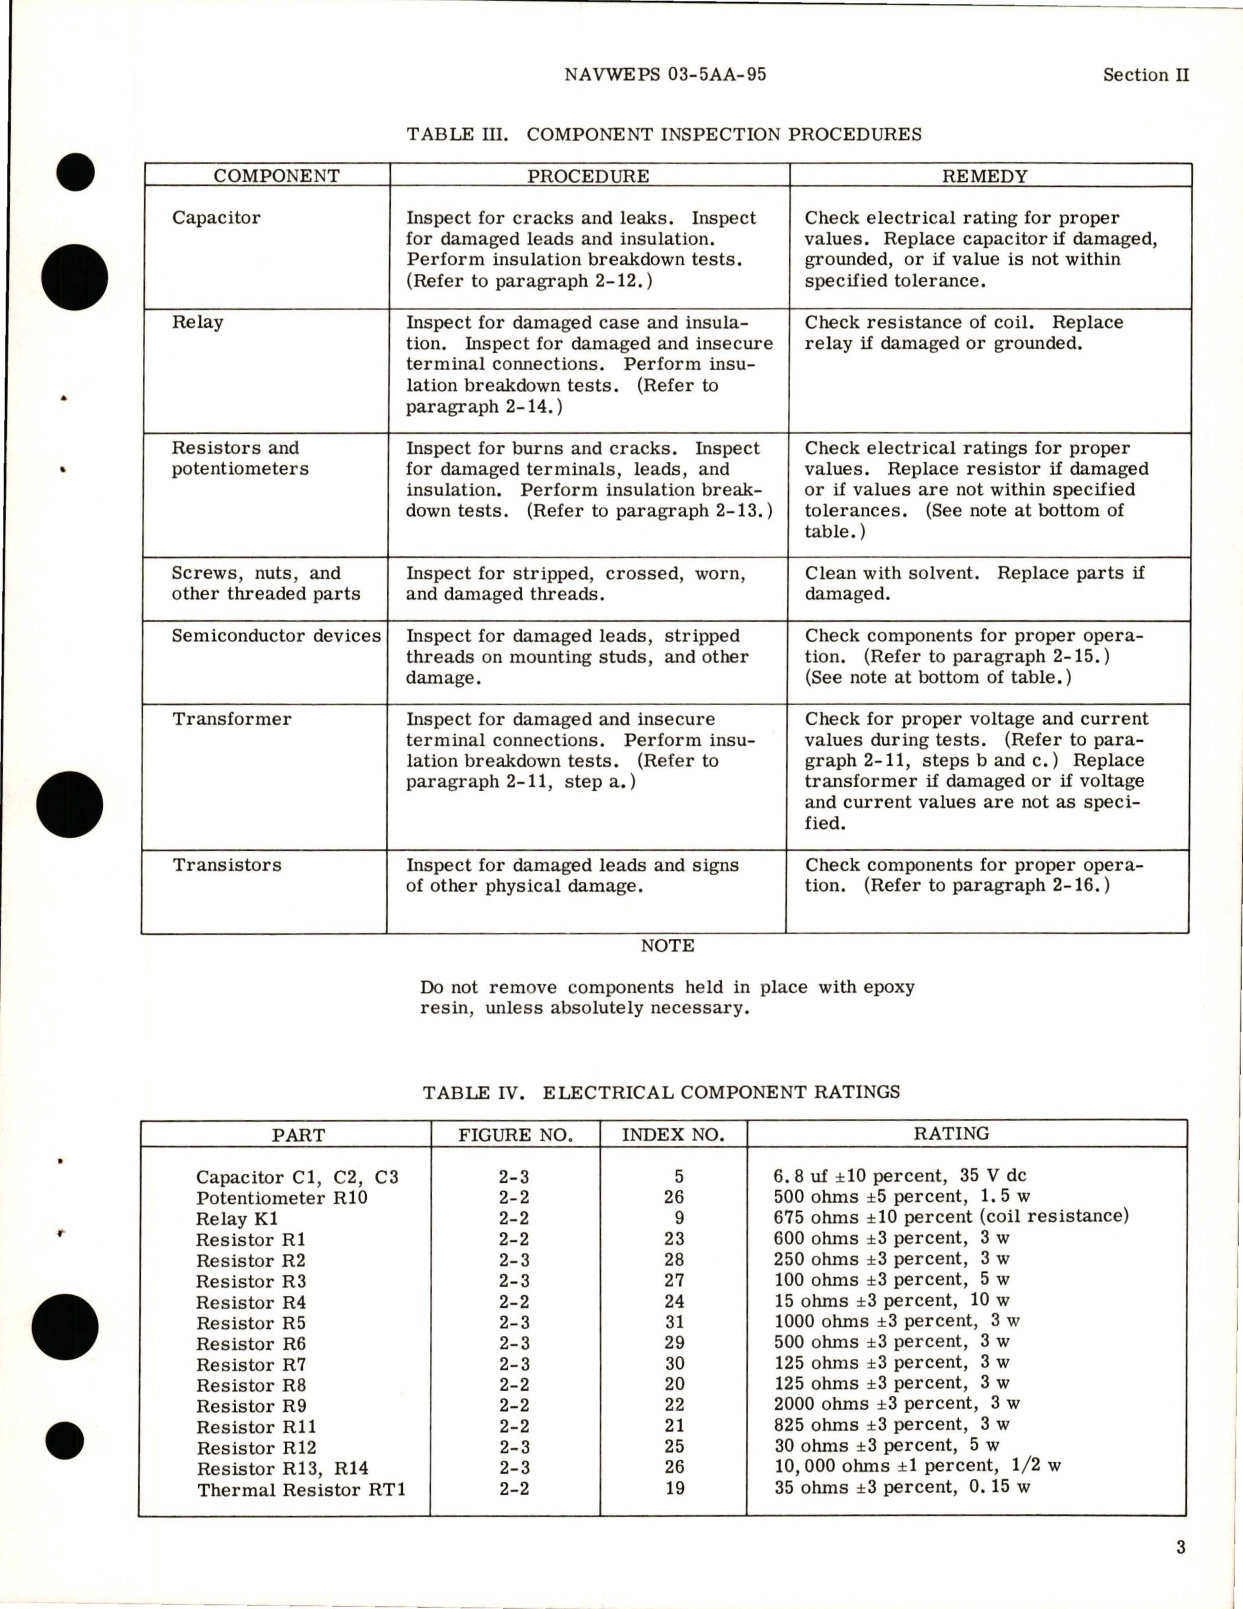 Sample page 7 from AirCorps Library document: Overhaul Instructions for Voltage Regulator - Types 20B63-1-A, 20B63-1-B, 20B63-1-C, 20B63-2-A, 20B63-2-B, 20B63-2-C, 20B72-1-A